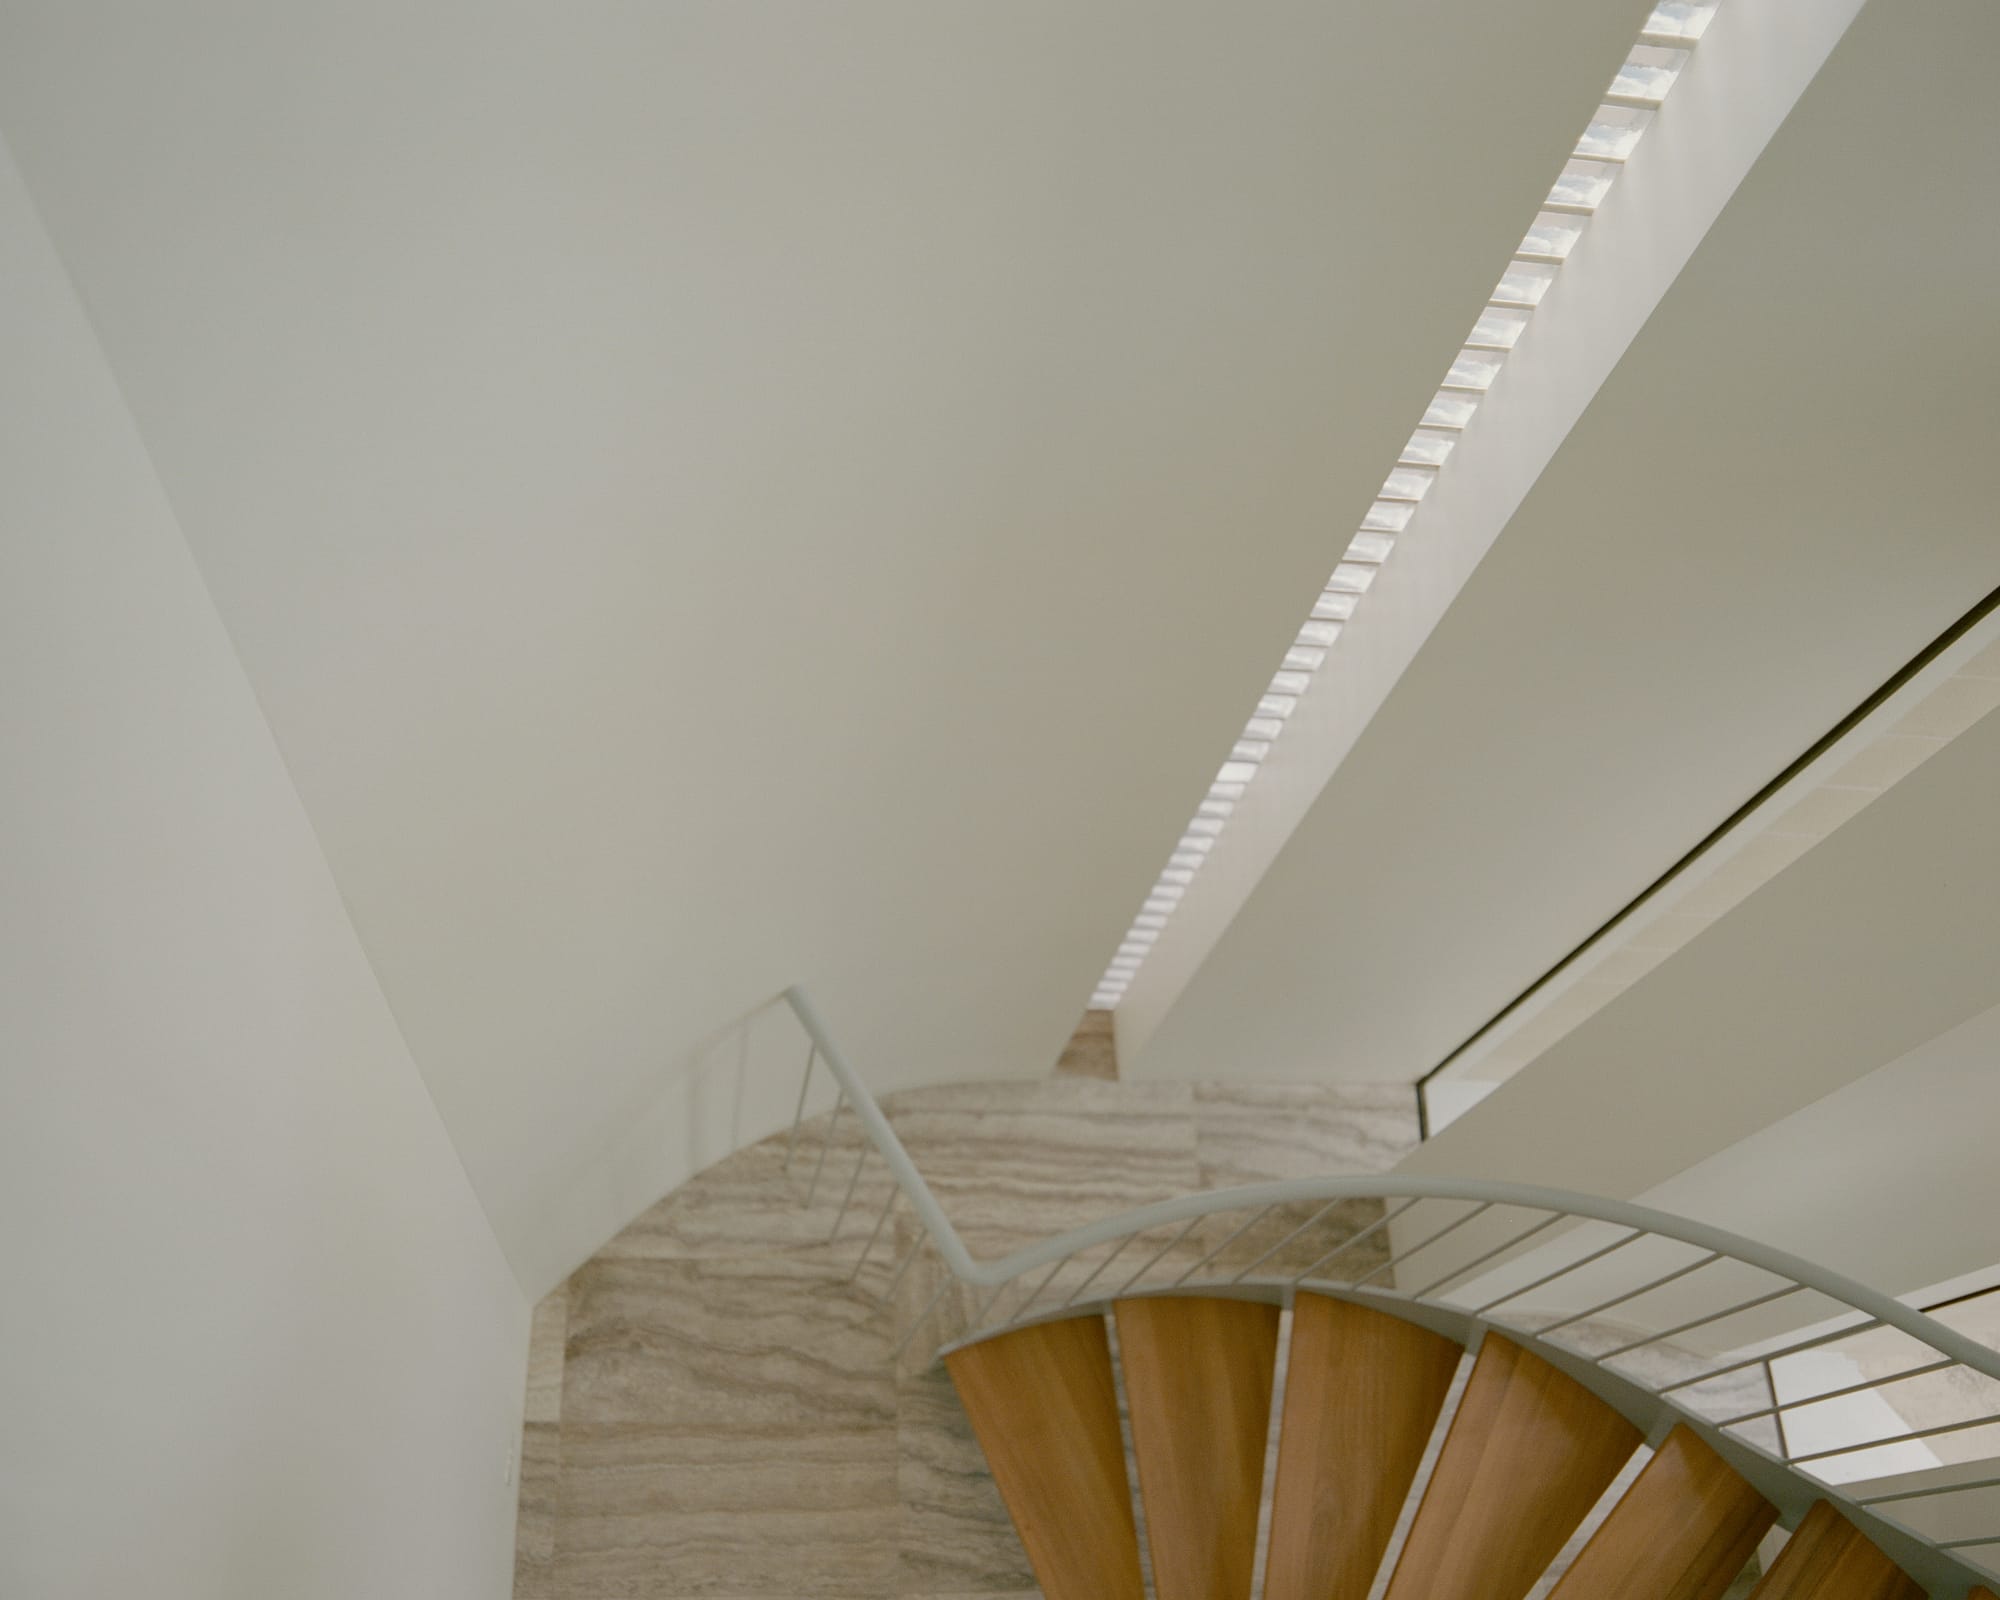 An interior shot showcases a staircase with light wood steps, white walls, and a curved ceiling with a skylight that allows natural light to stream in.